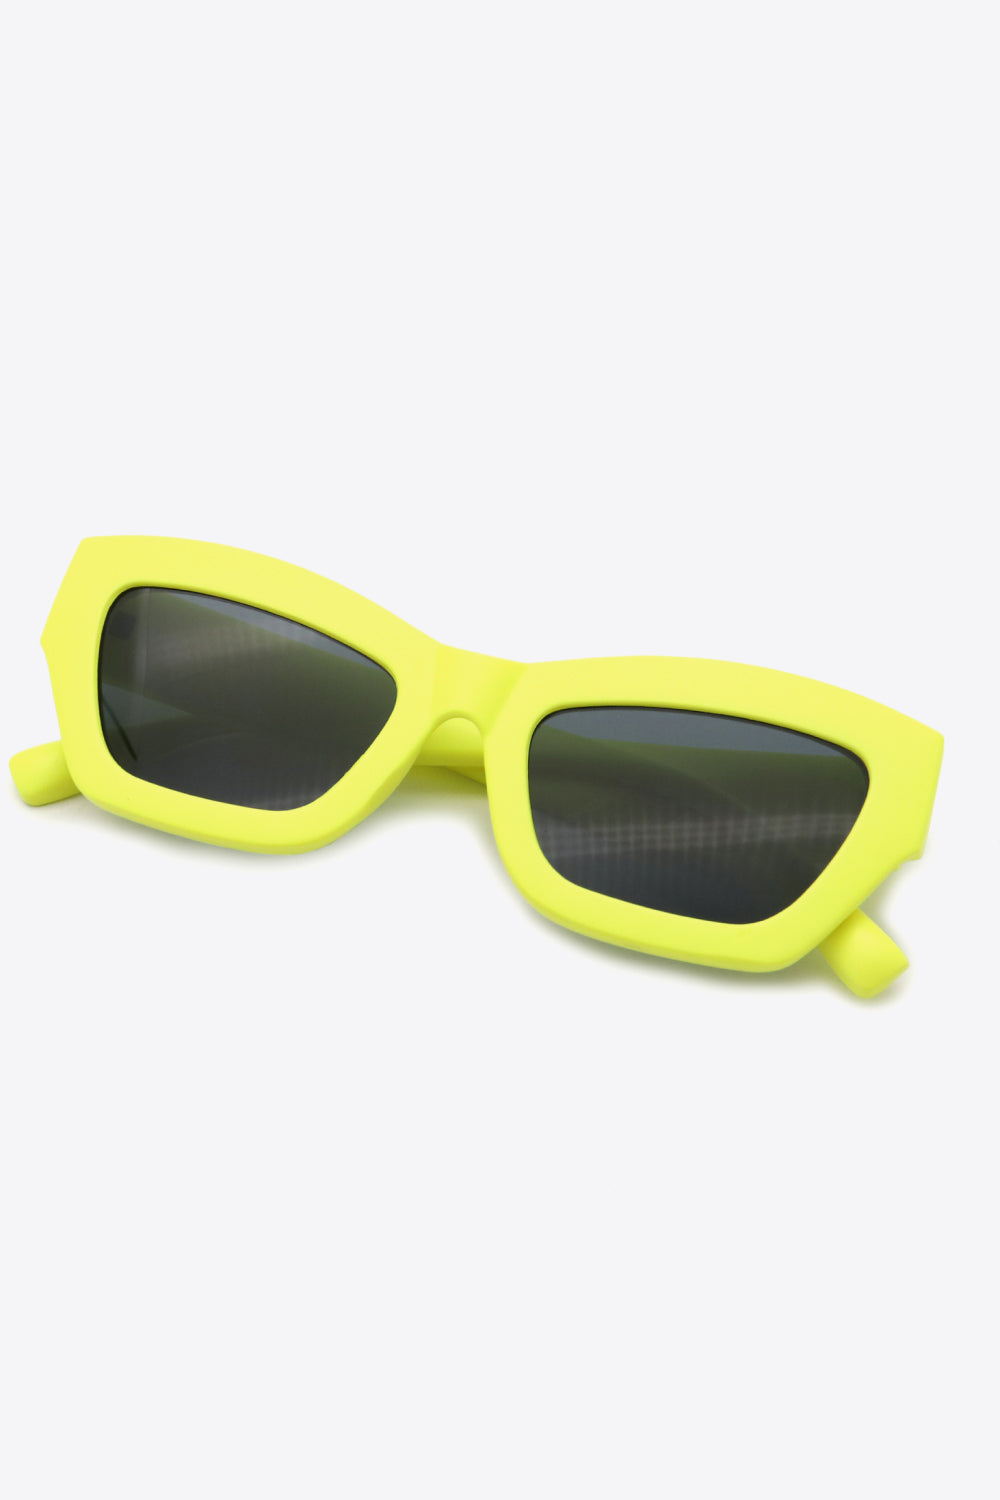 Classic UV400 Polycarbonate Frame Sunglasses Print on any thing USA/STOD clothes